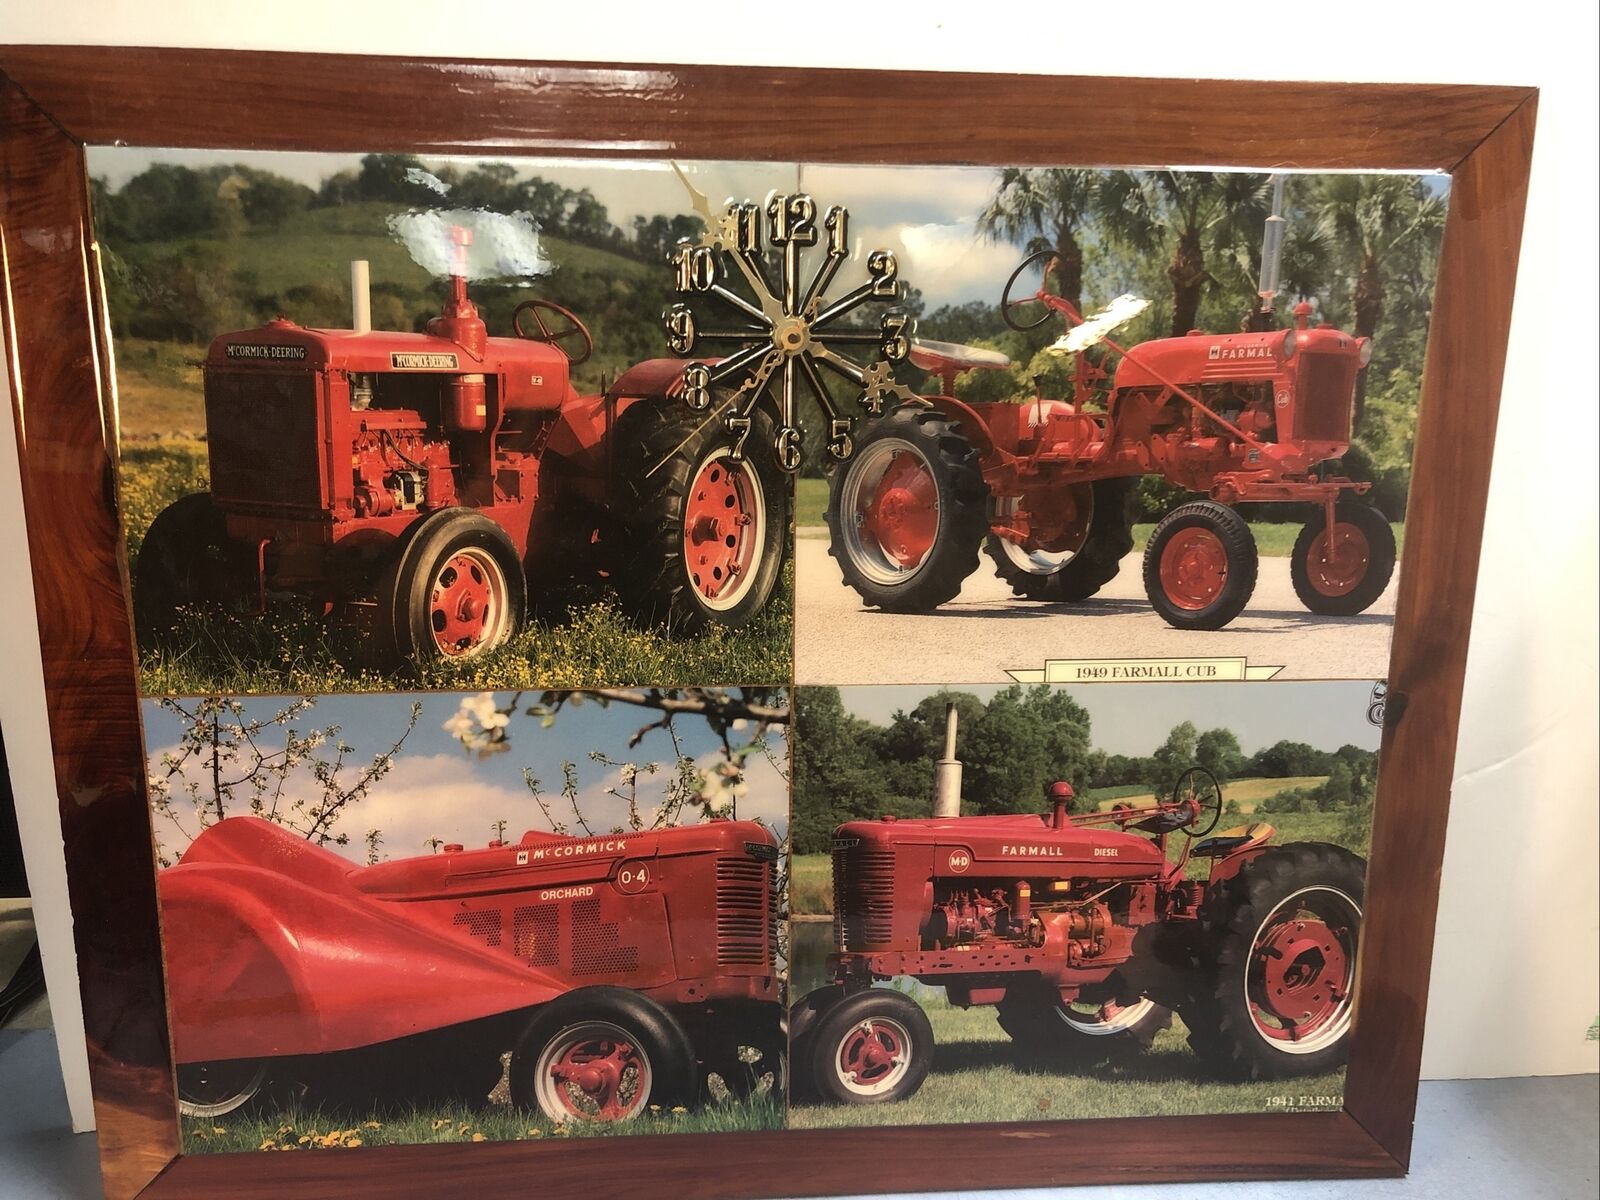 McCormick Deering Orchard, Farmall, 4 Photo Clock, Wooden Border, Works Great